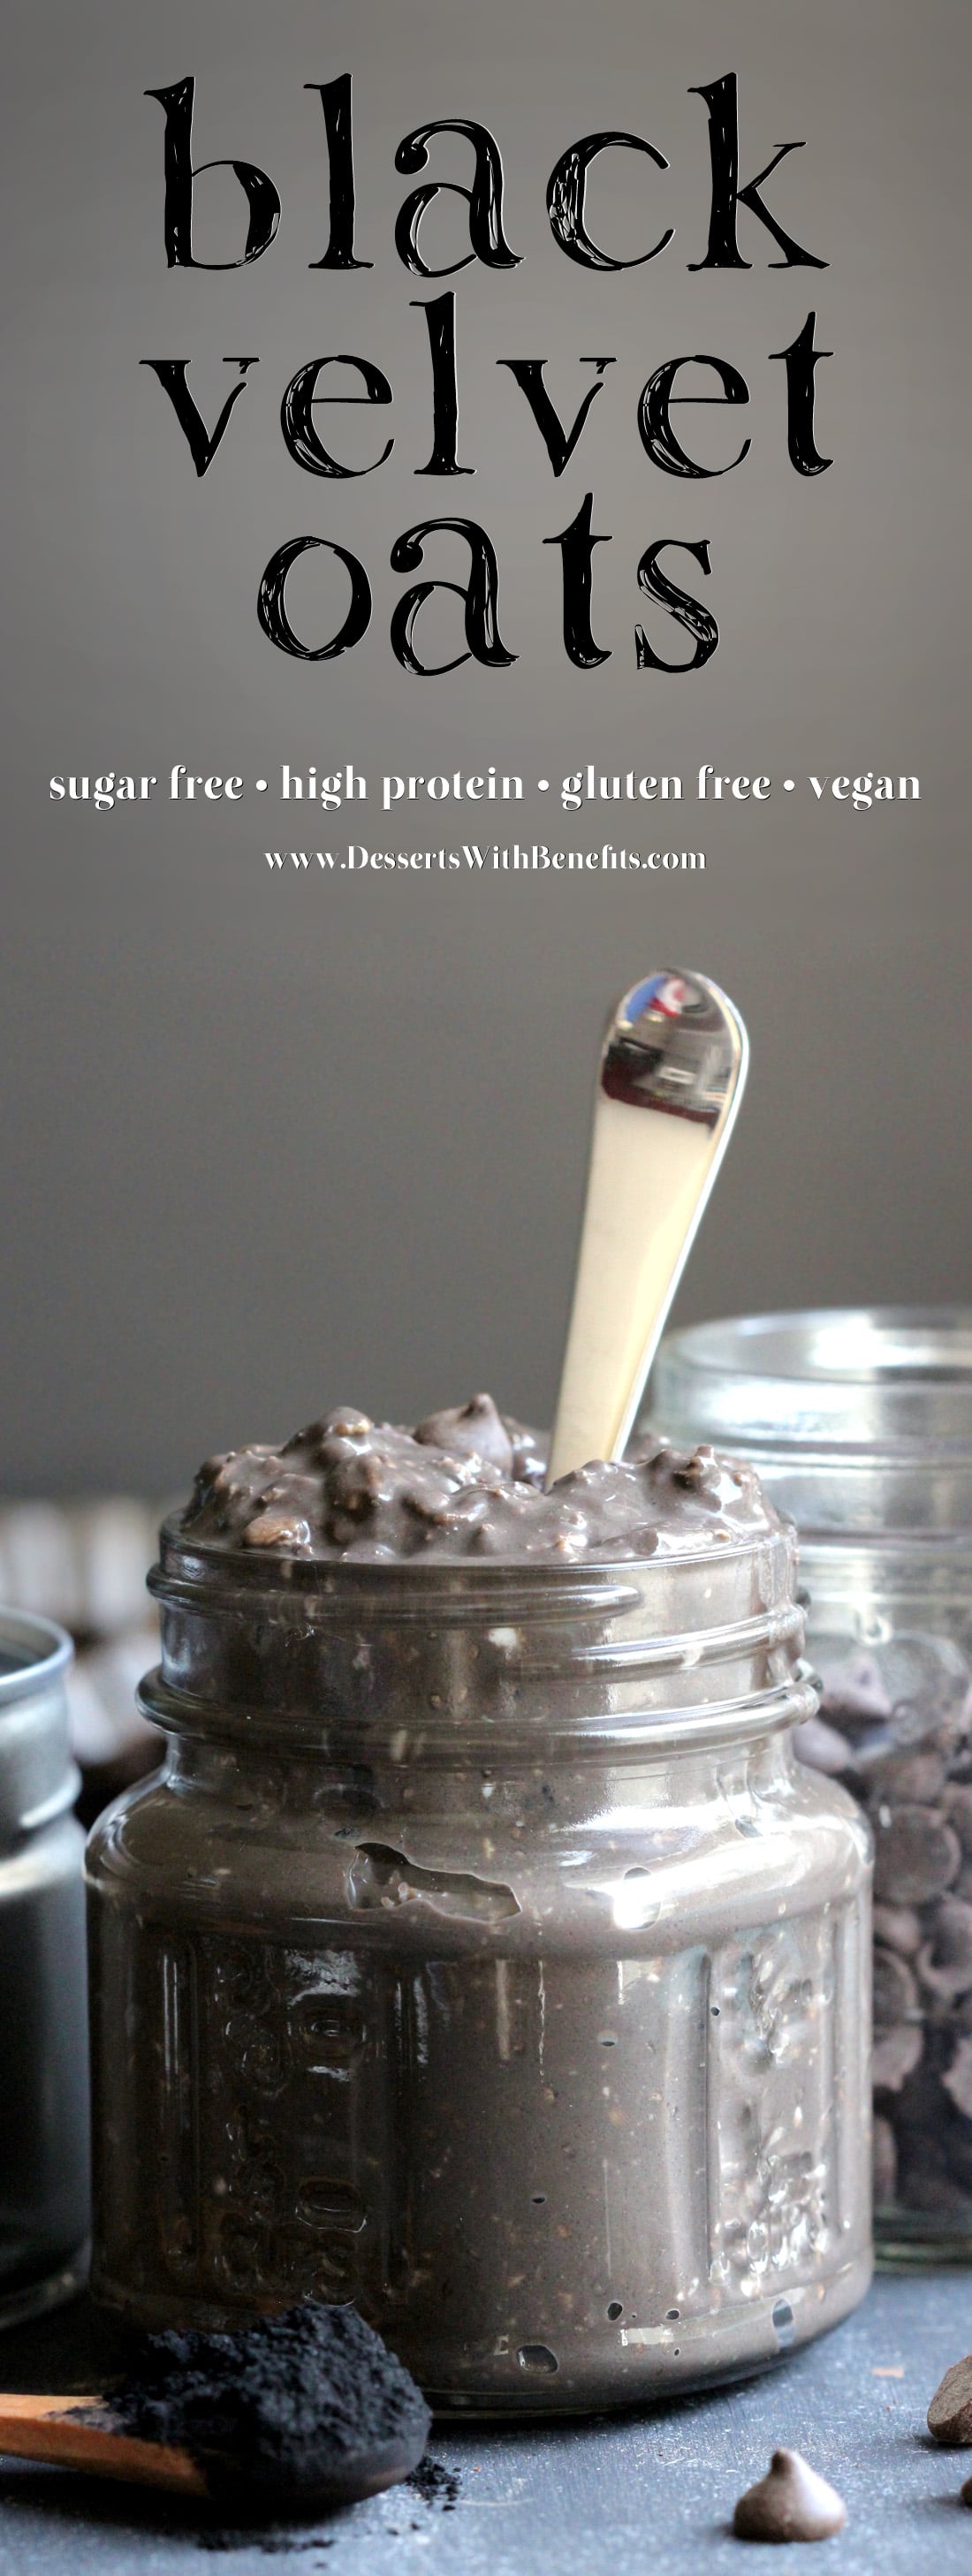 Secret ingredient Healthy Black Velvet Overnight Dessert Oats – it’s perfectly sweet, nice and chocolatey, and will keep you full for hours (just like how all breakfasts should)! You’d never know these oats are all natural, sugar free, high protein, gluten free, dairy free, AND vegan. Black Velvet is just like red velvet, only black! -- Healthy Dessert Recipes with sugar free, low calorie, low fat, high protein, gluten free, dairy free, vegan, and raw options at the Desserts With Benefits Blog (www.DessertsWithBenefits.com)